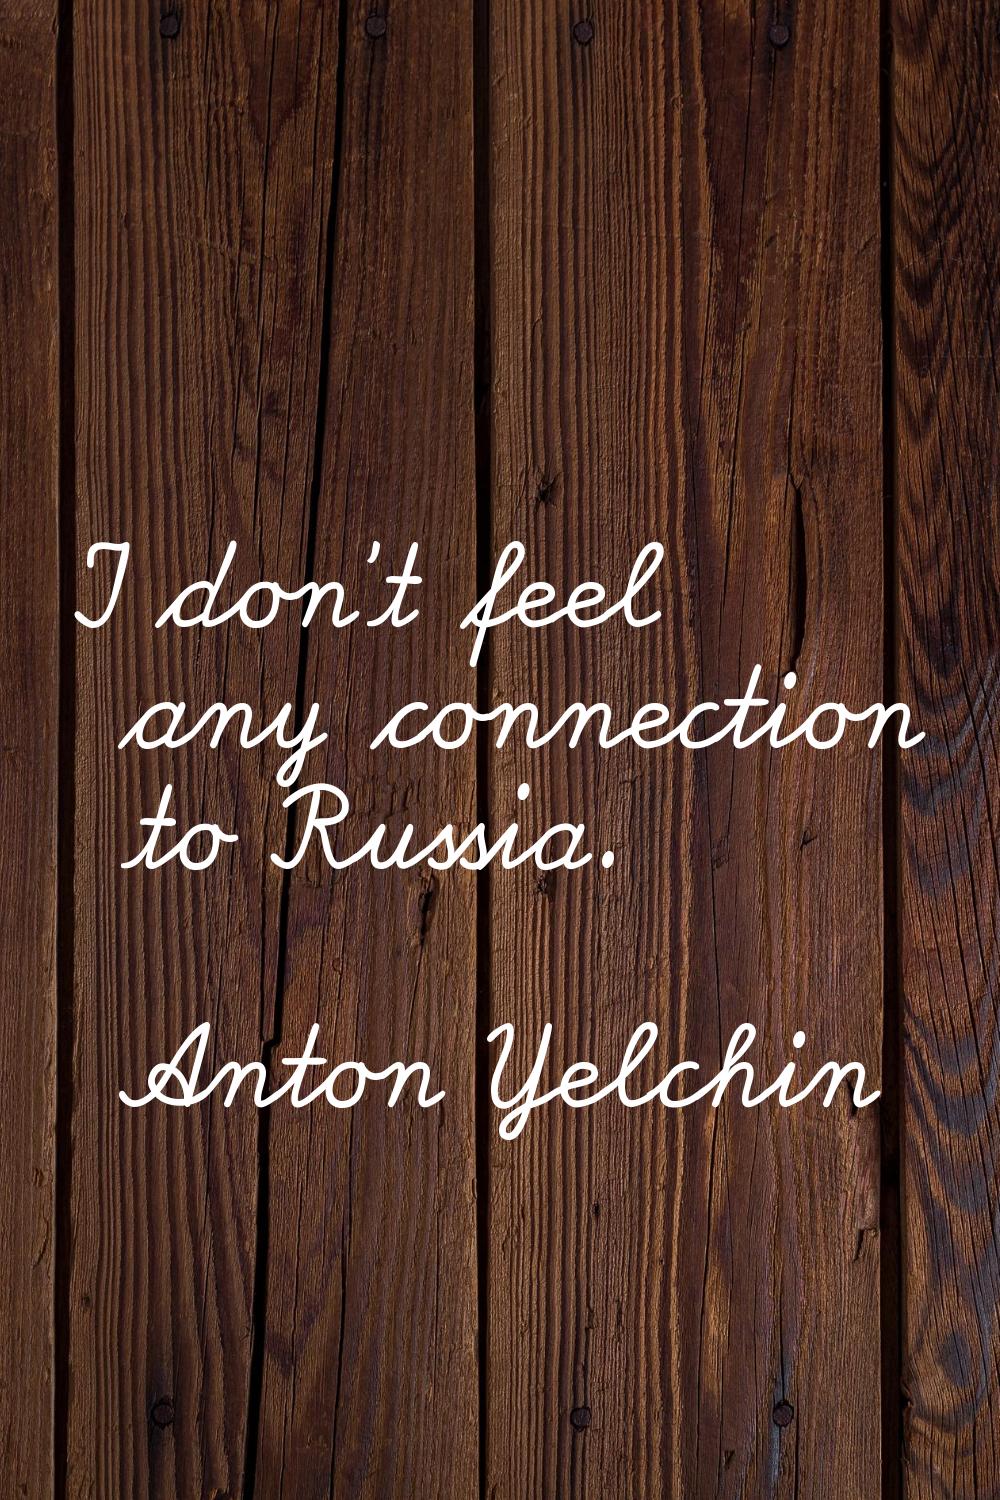 I don't feel any connection to Russia.